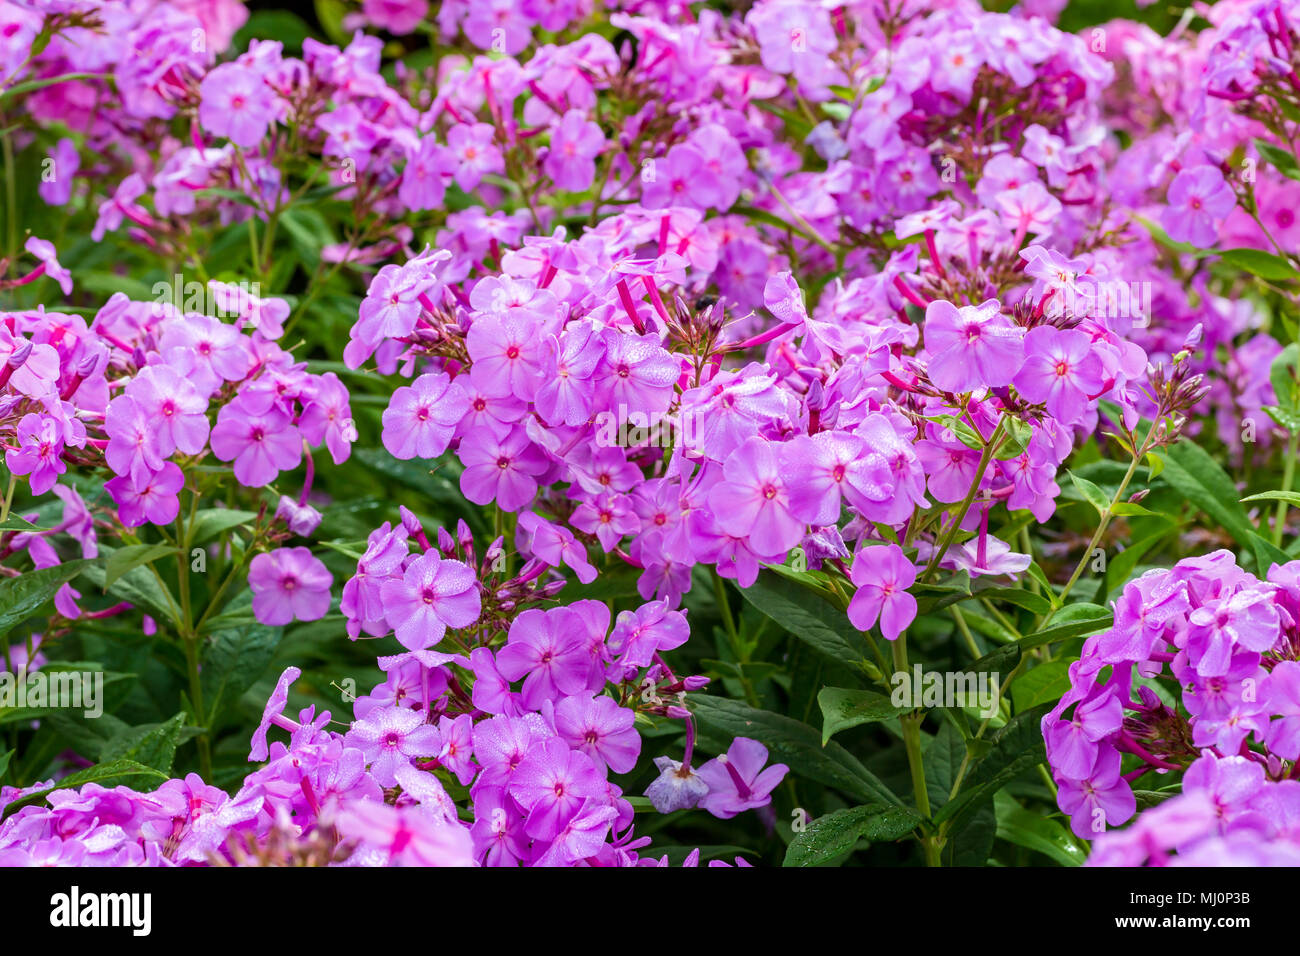 Lavender pink garden phlox blooming profusely in the home perennial bed. Stock Photo